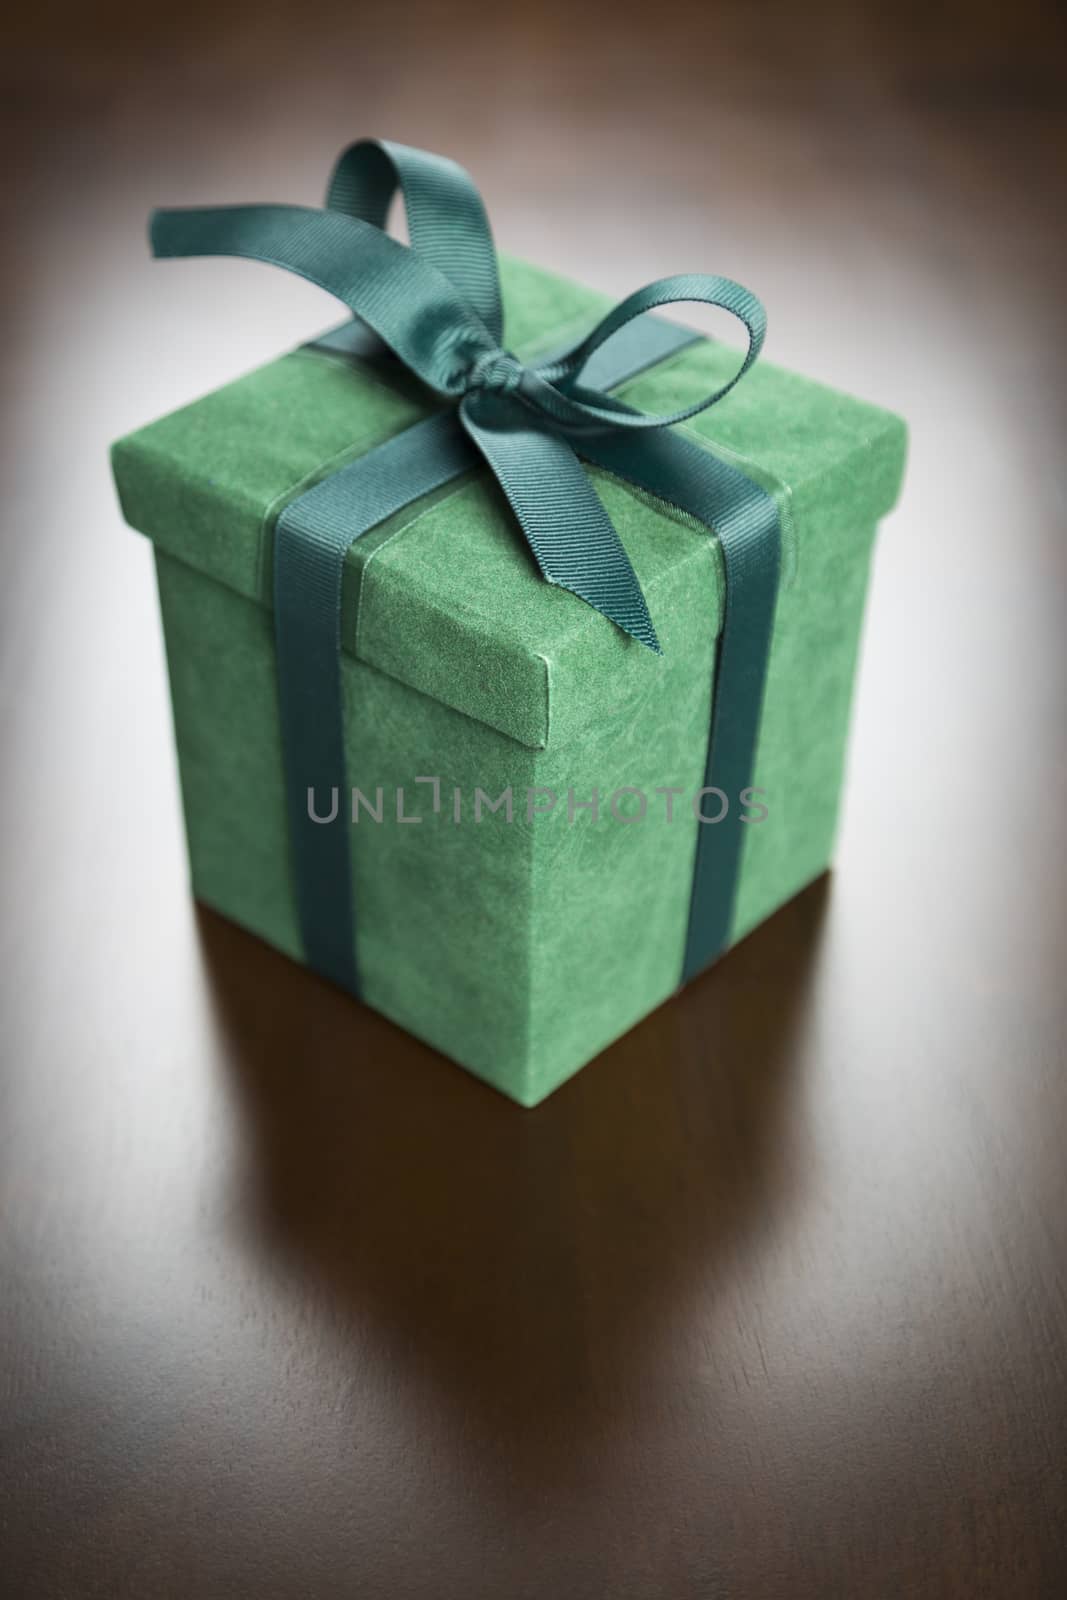 Green Gift Box with Ribbon and Bow Resting on Wood Surface.